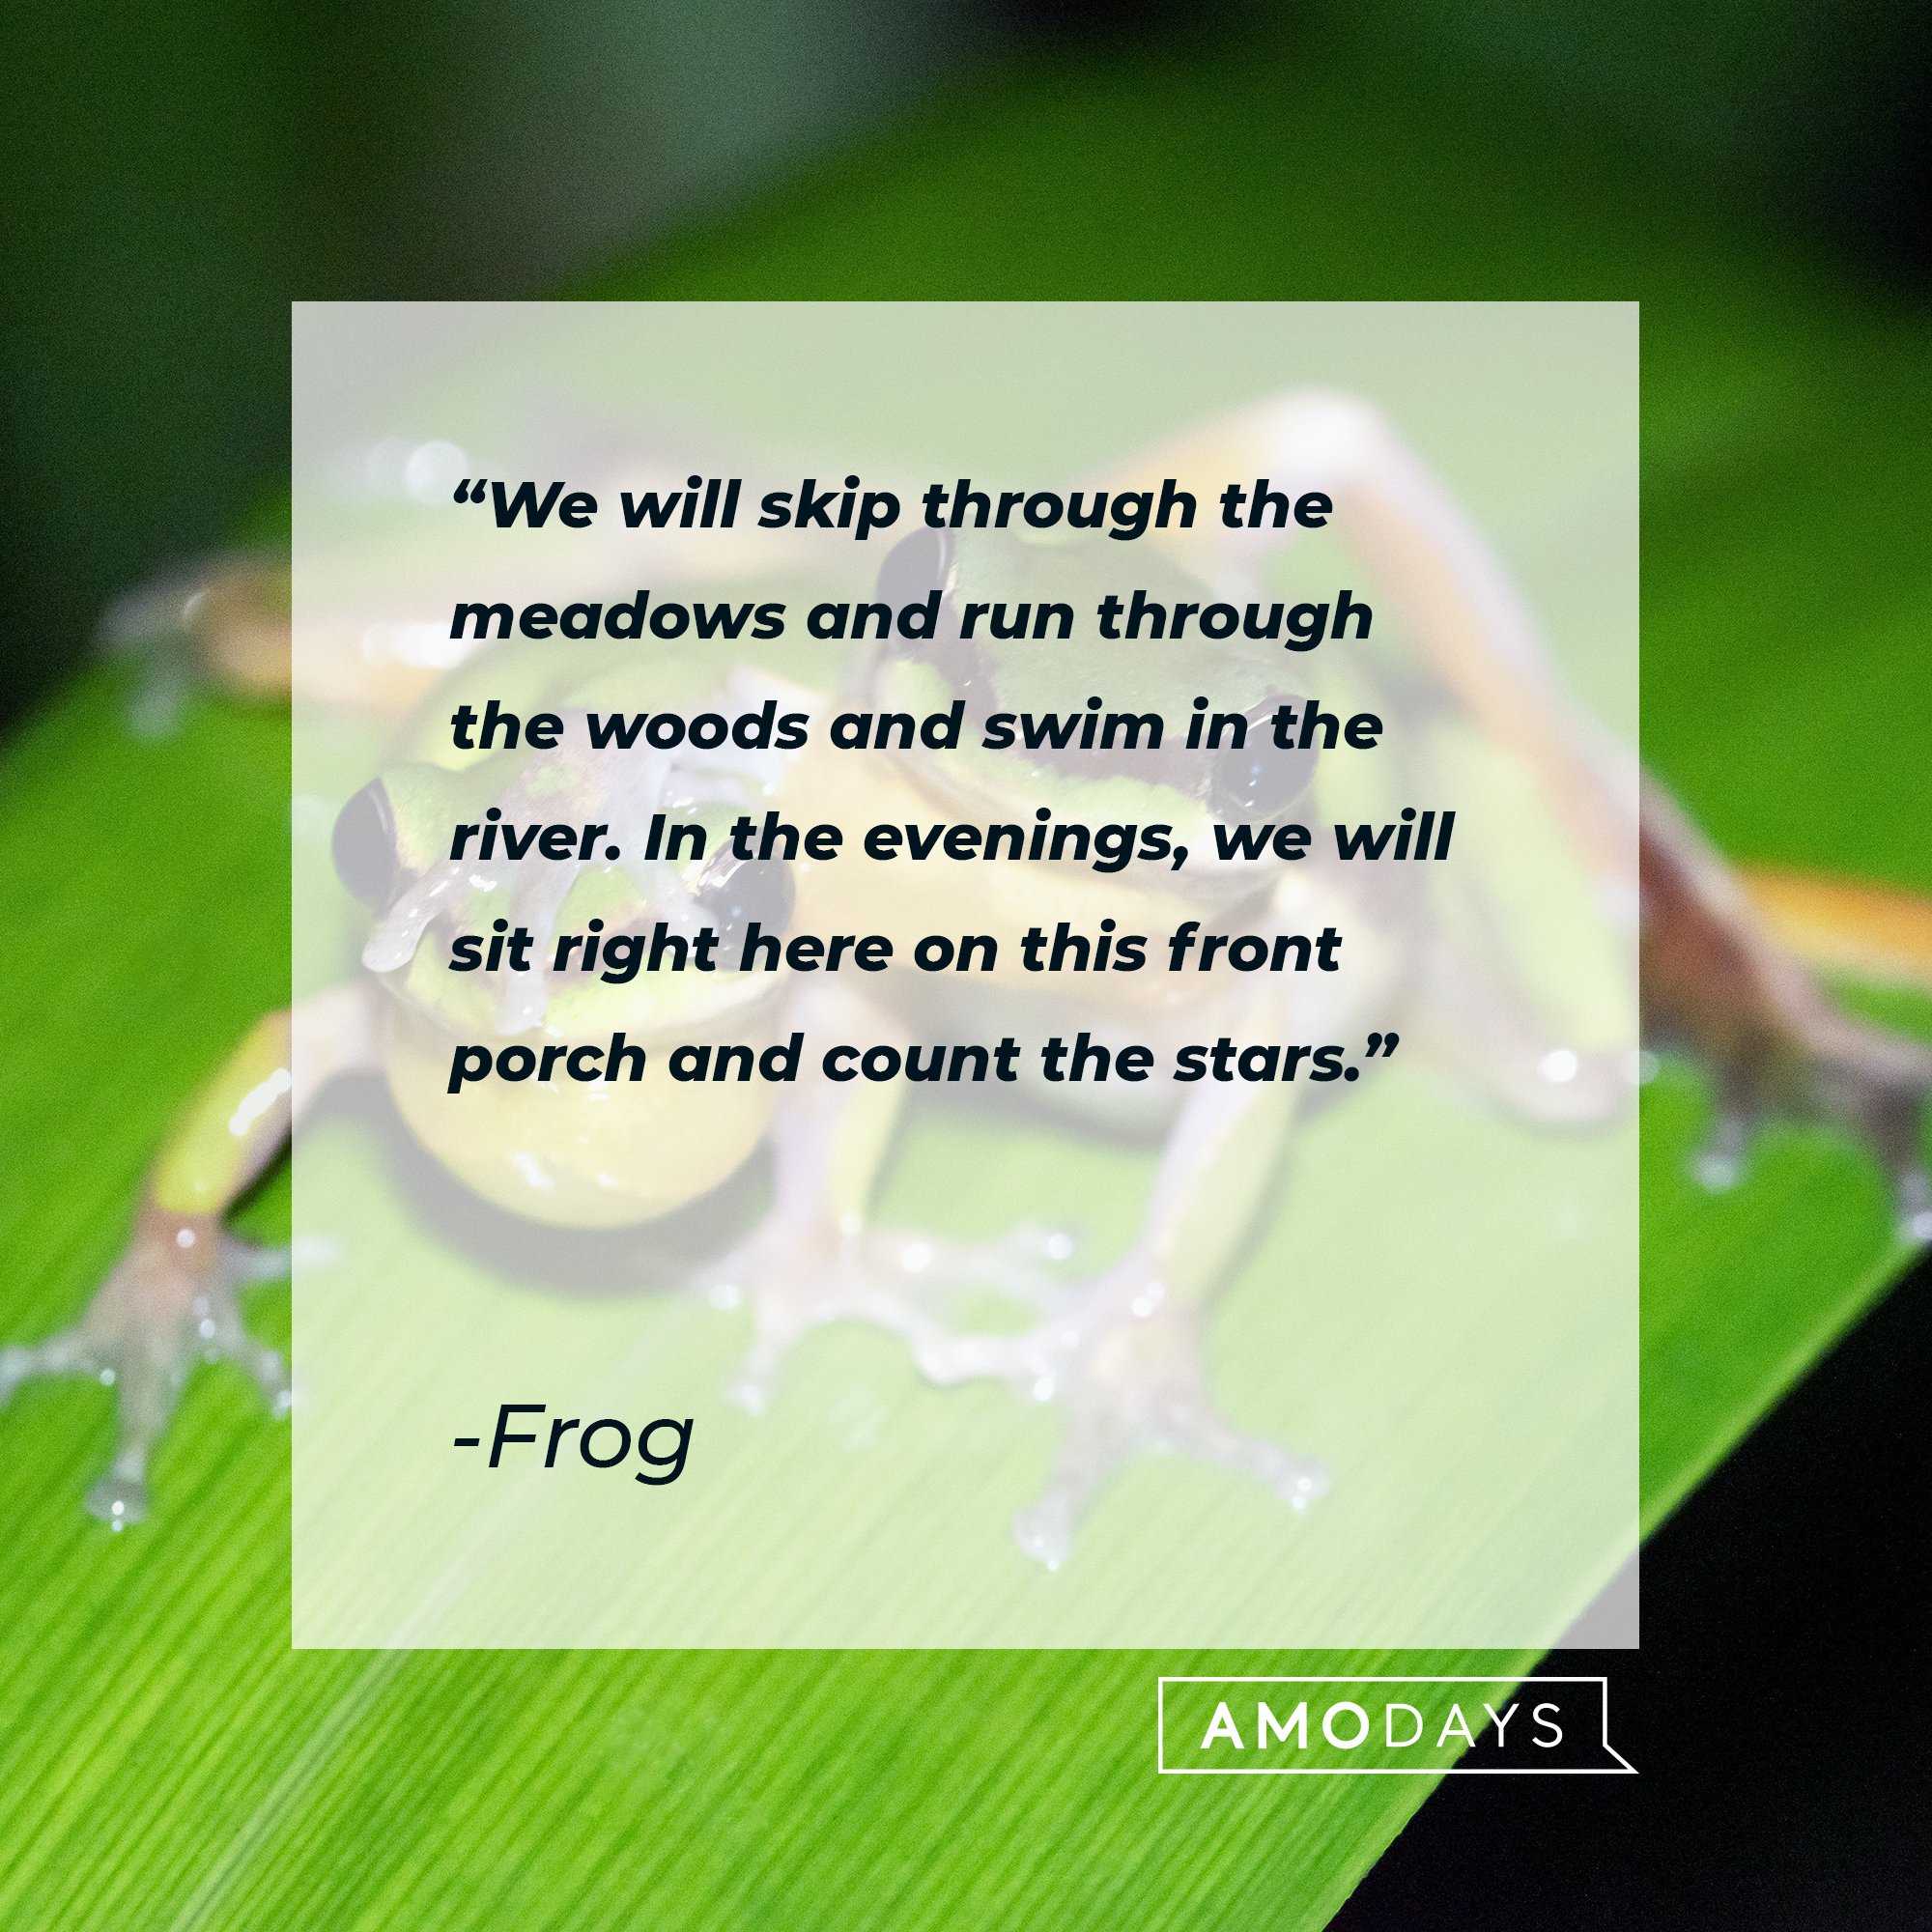 Frog's quote: "We will skip through the meadows and run through the woods and swim in the river. In the evenings, we will sit right here on this front porch and count the stars." | Image: AmoDays